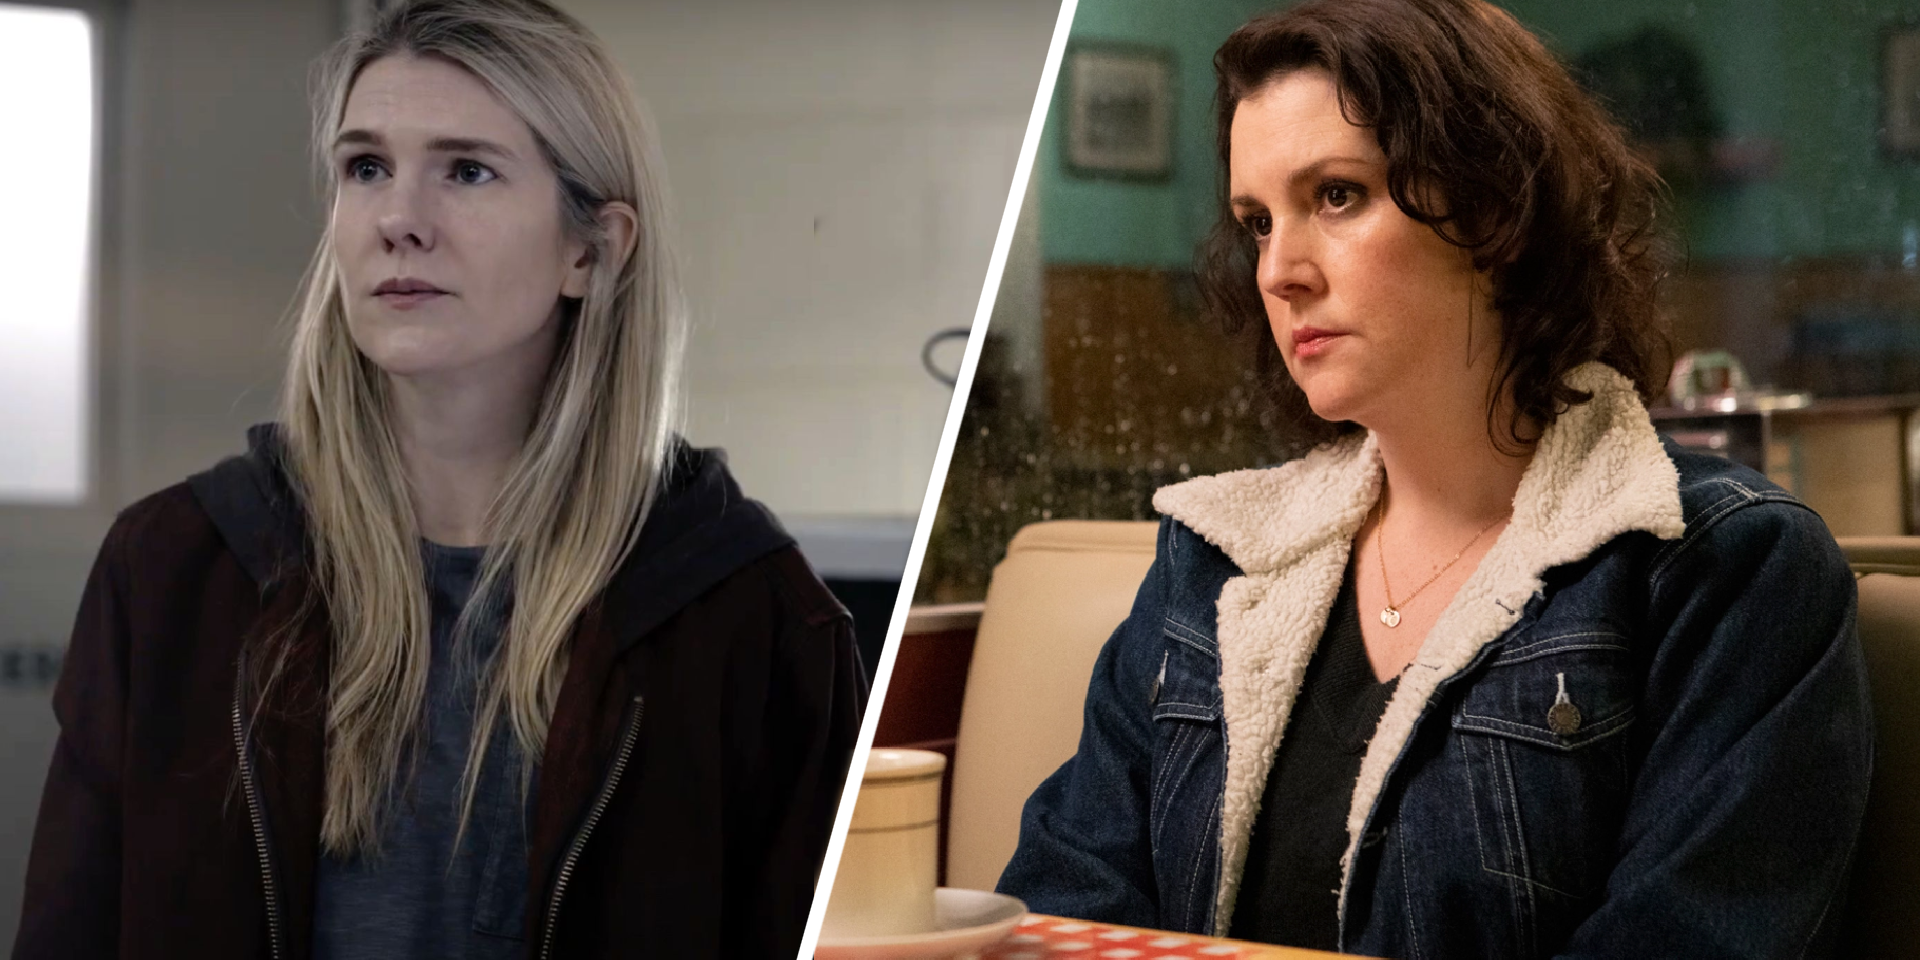 Lily Rabe and Melanie Lynskey star in underrated roles. 